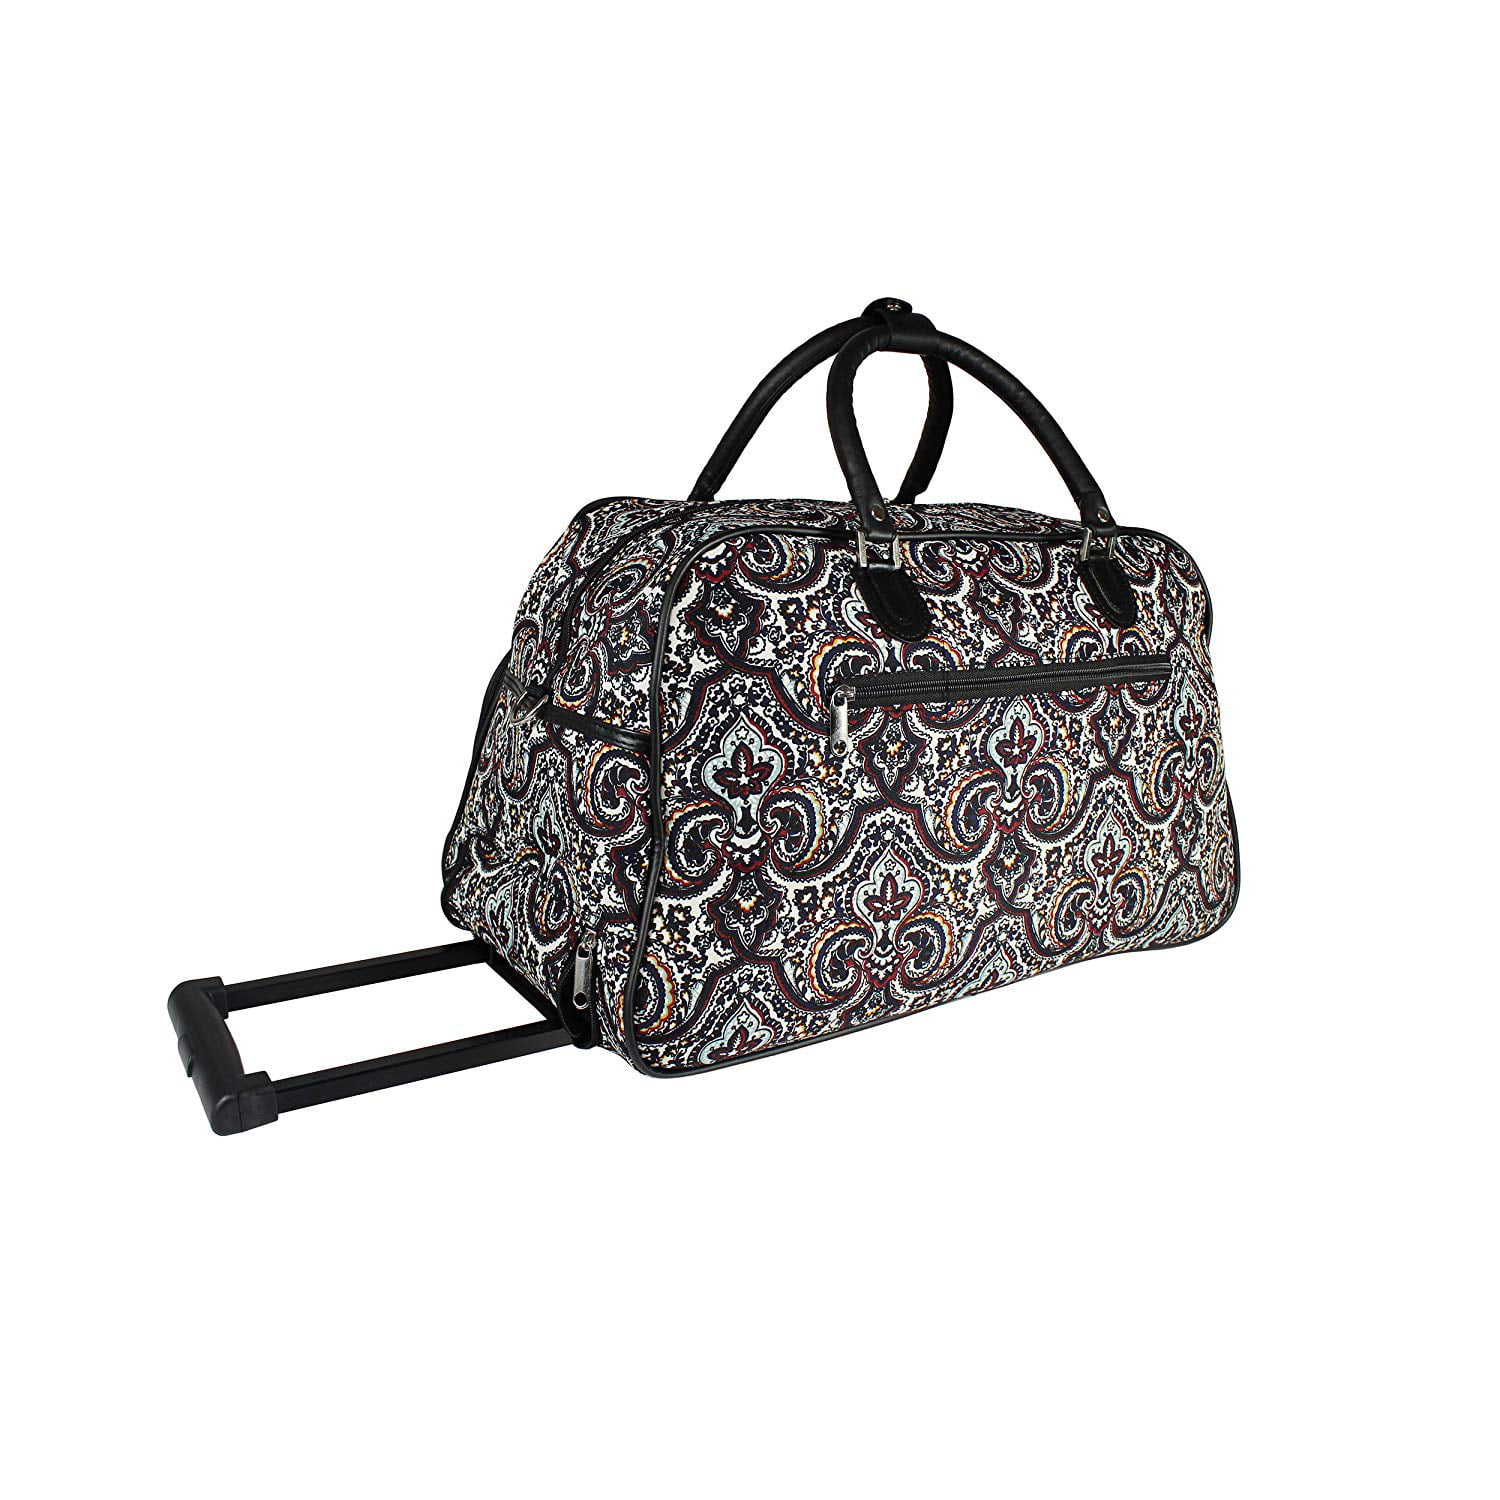 World Traveler 21-Inch Carry-On Rolling Duffel Bag - New Paisley 